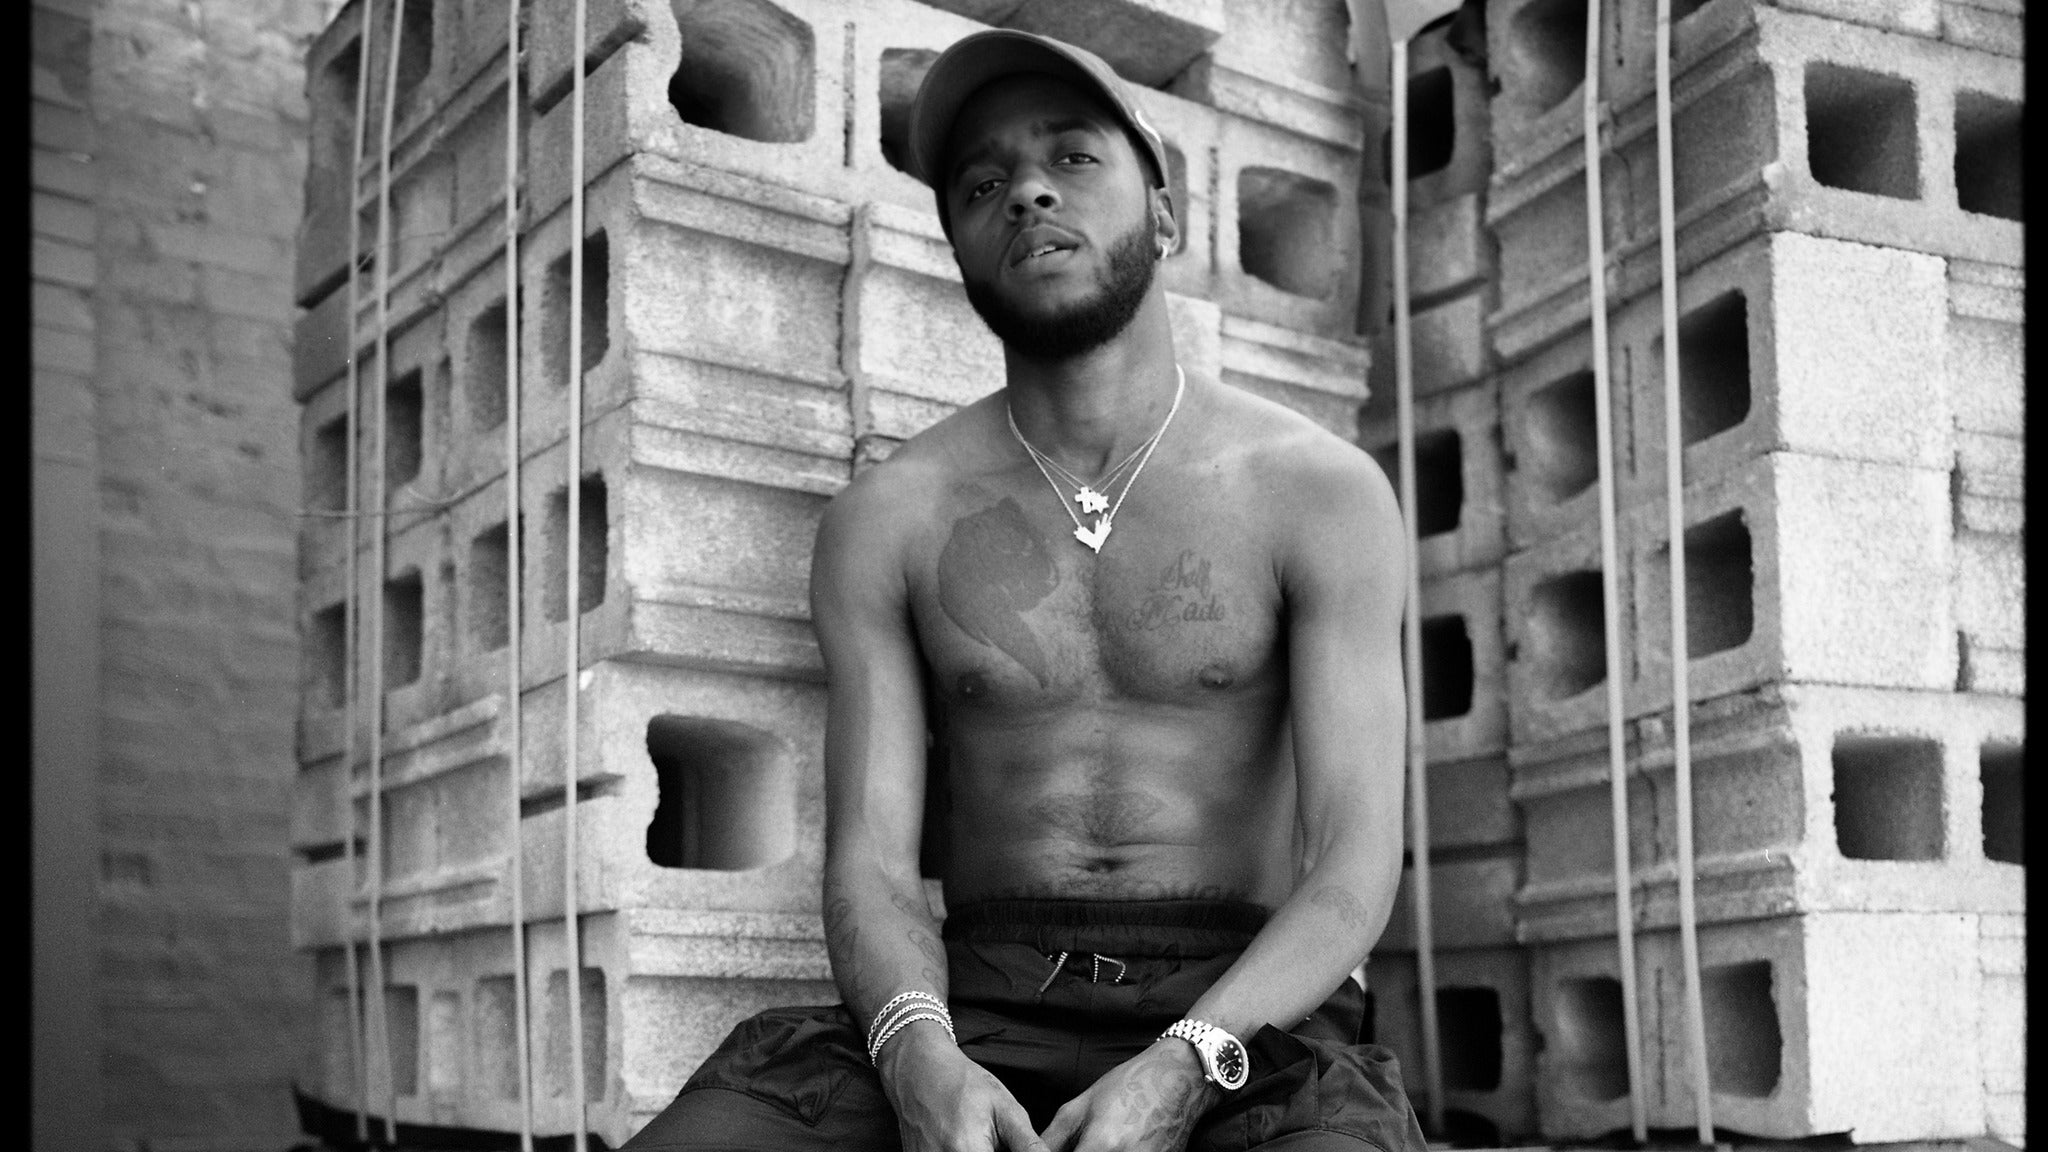 6LACK Presents From East Atlanta with Love Tour in Atlanta promo photo for Live Nation Mobile App presale offer code